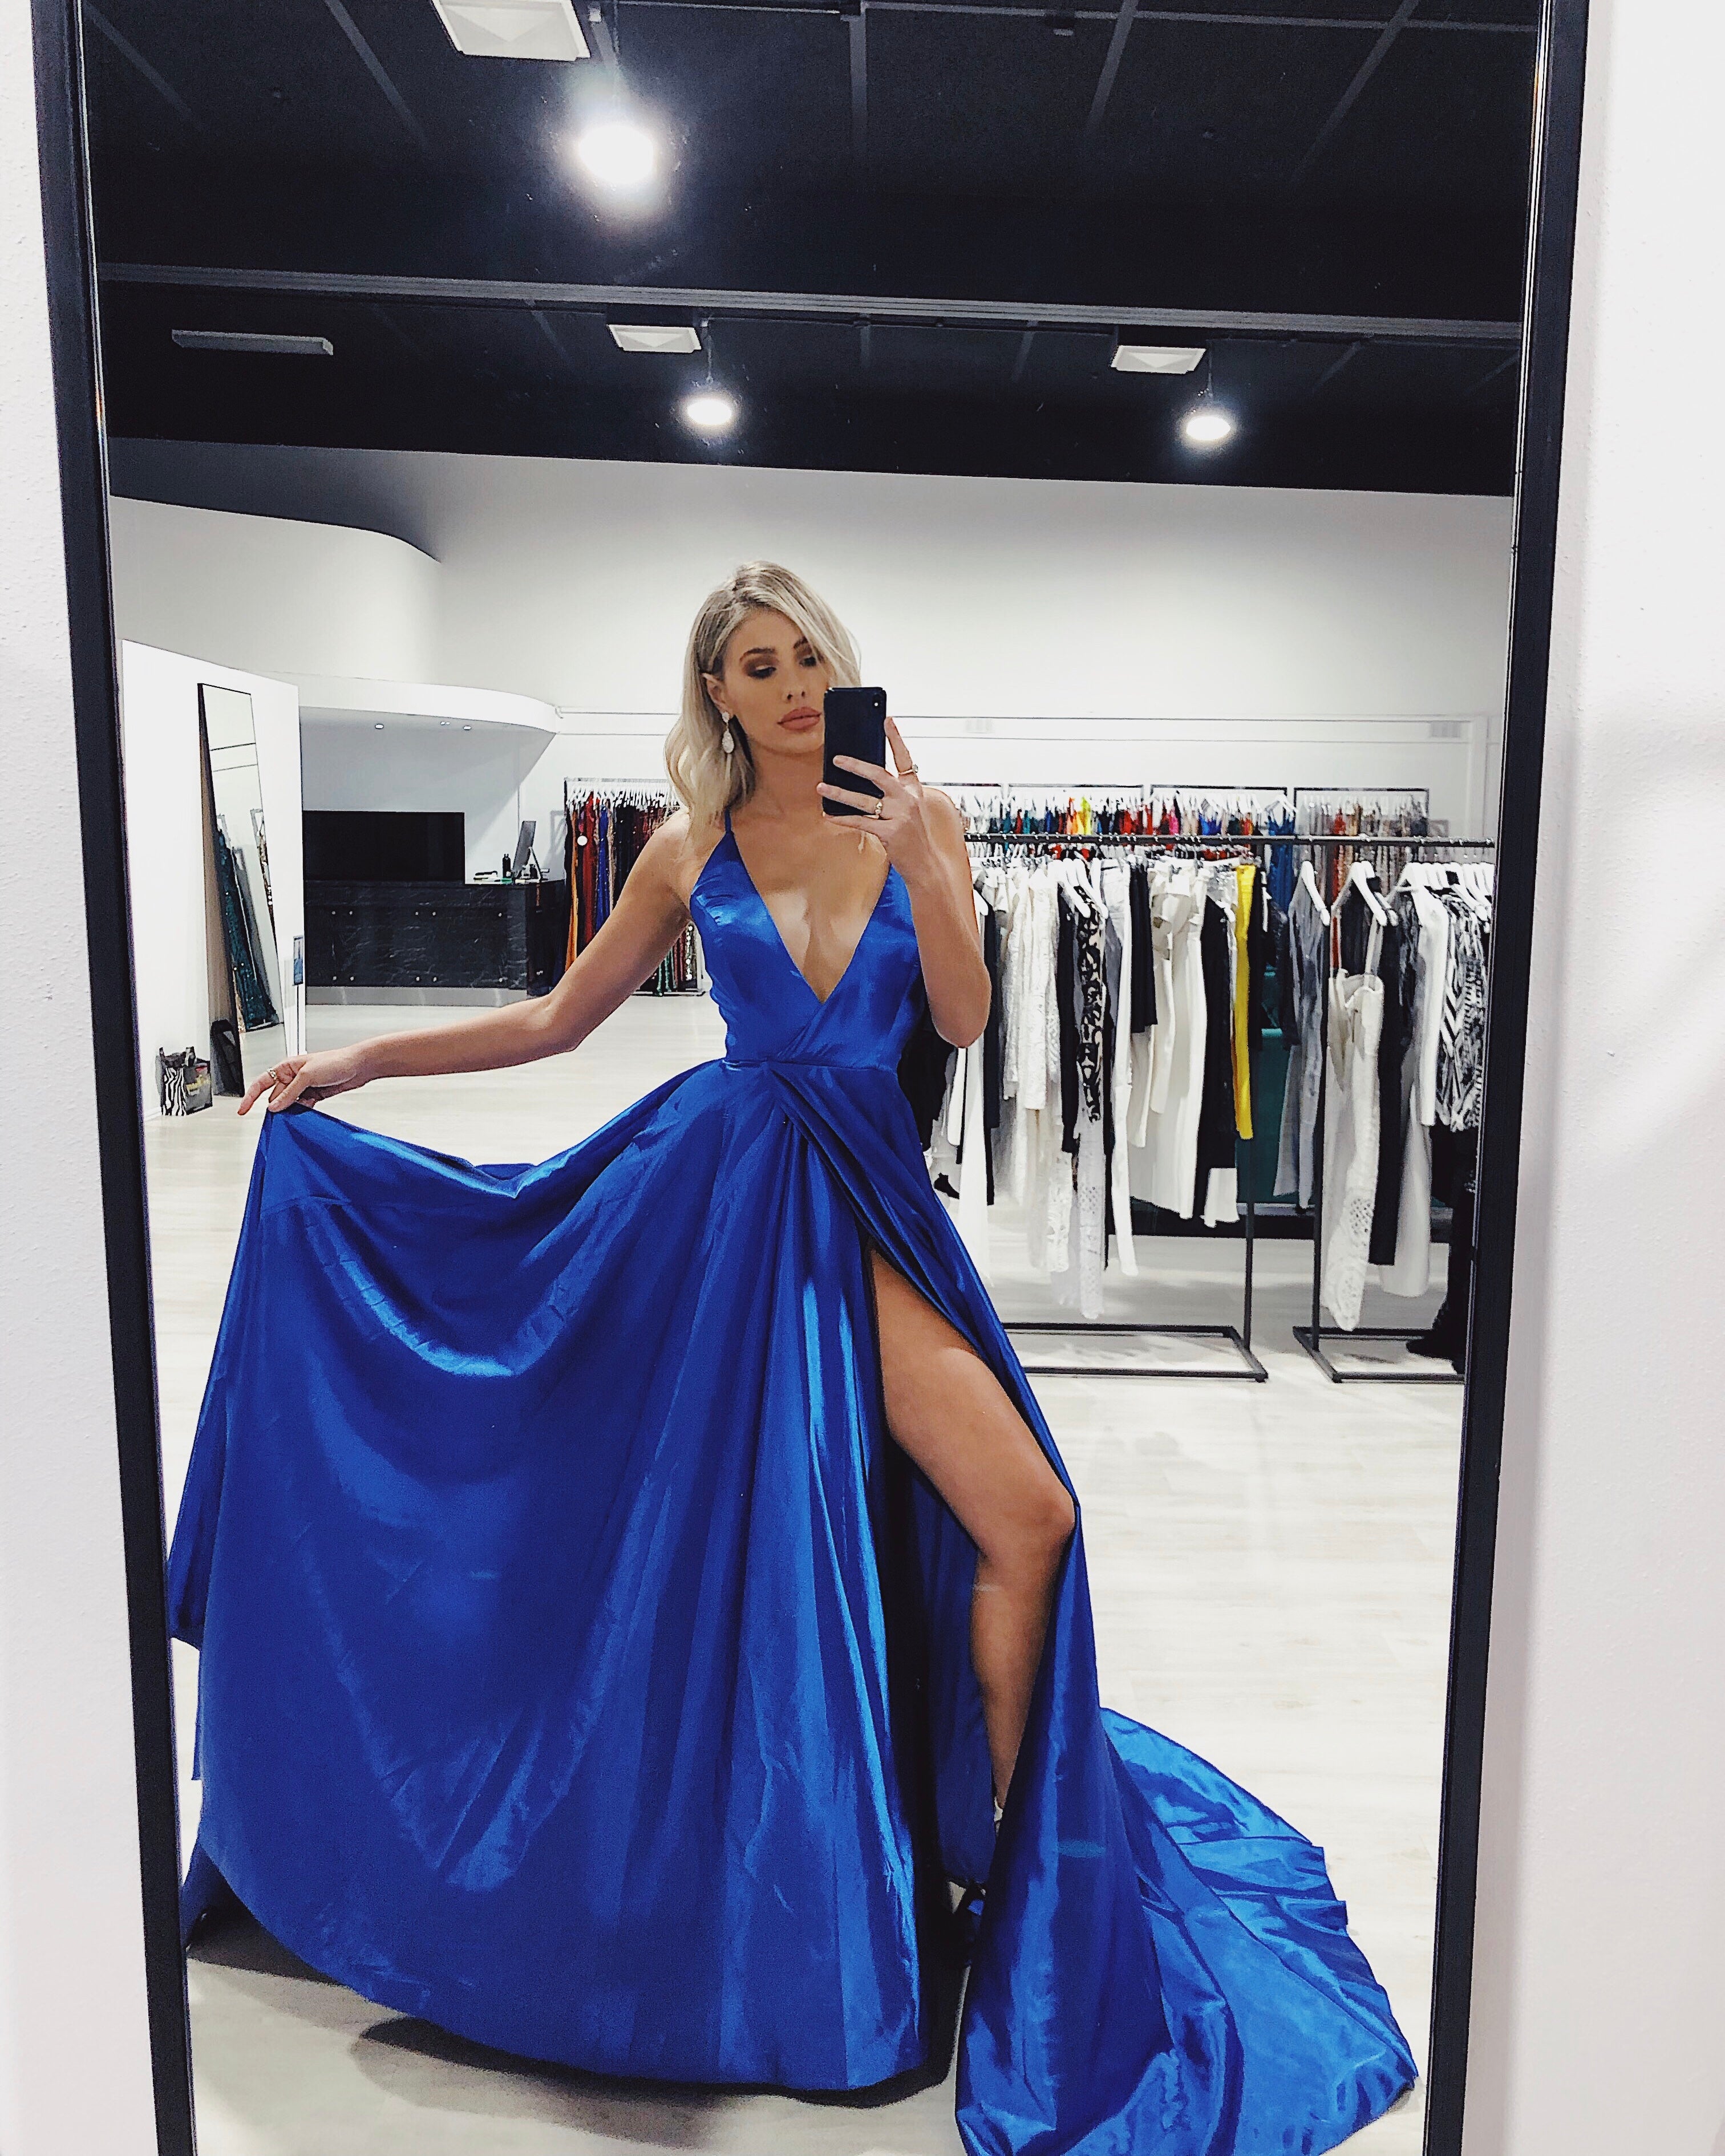 KATHLEEN Electric Blue Lace Up Back Satin Formal Gown Private Label$ AfterPay Humm ZipPay LayBuy Sezzle